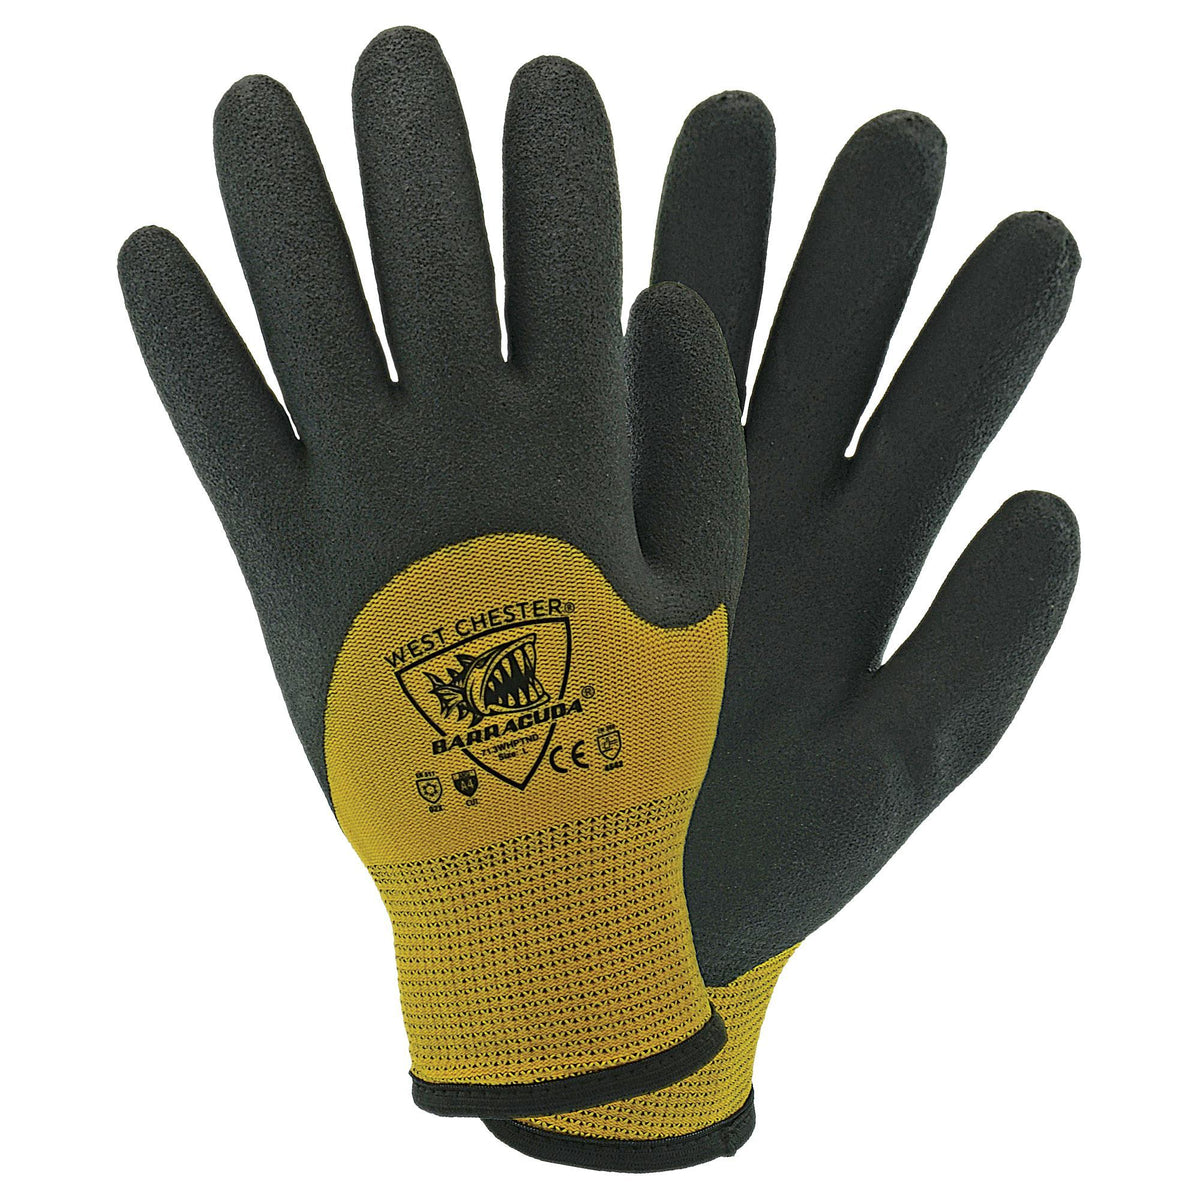 Westchester HPT Thermal 3/4 Coated Gloves 1pair